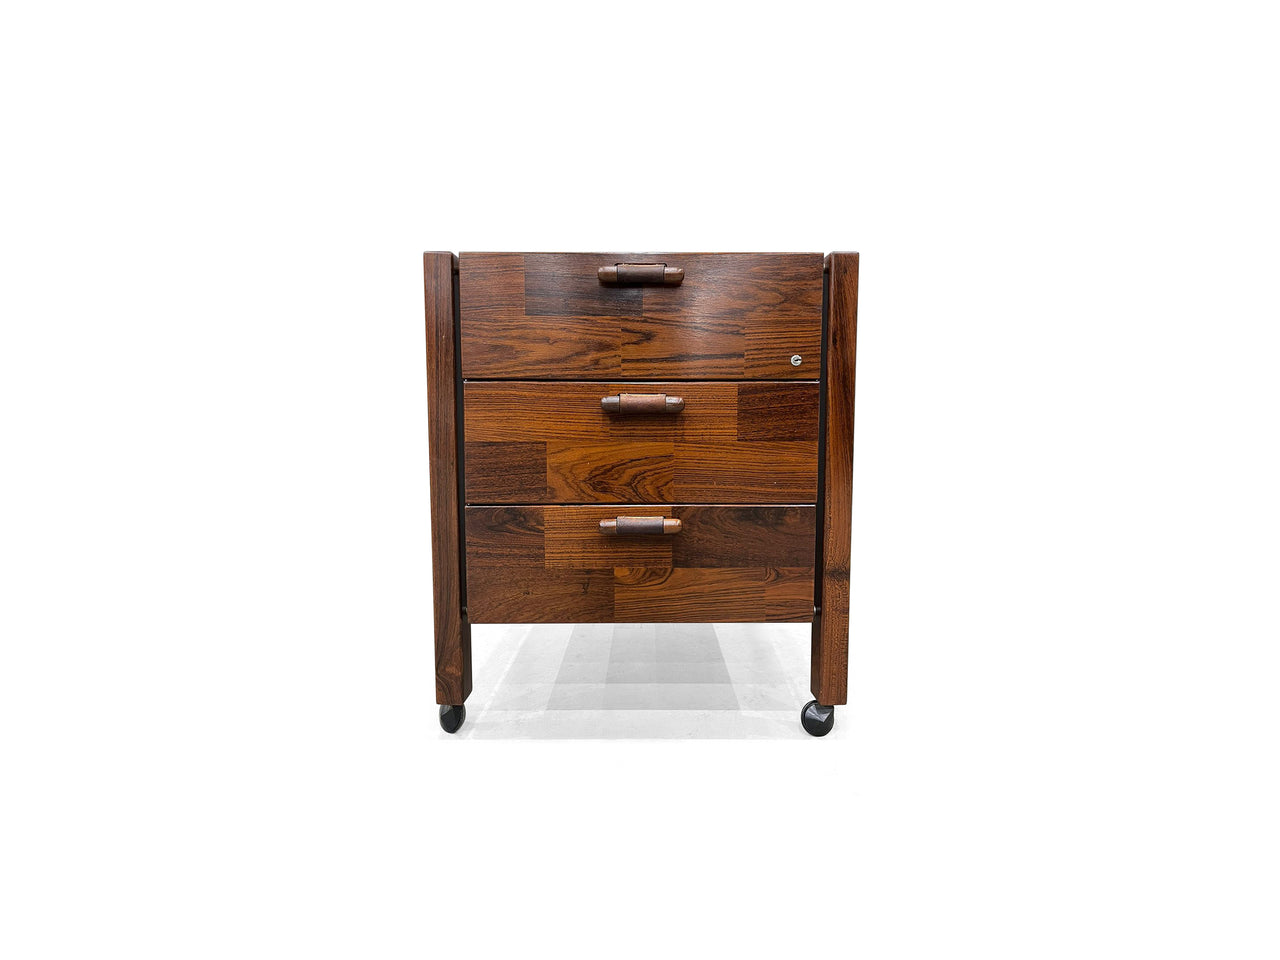 File cabinet with 3 drawers in hardwood by Jorge Zalszupin, c. 1960 - Lot 579